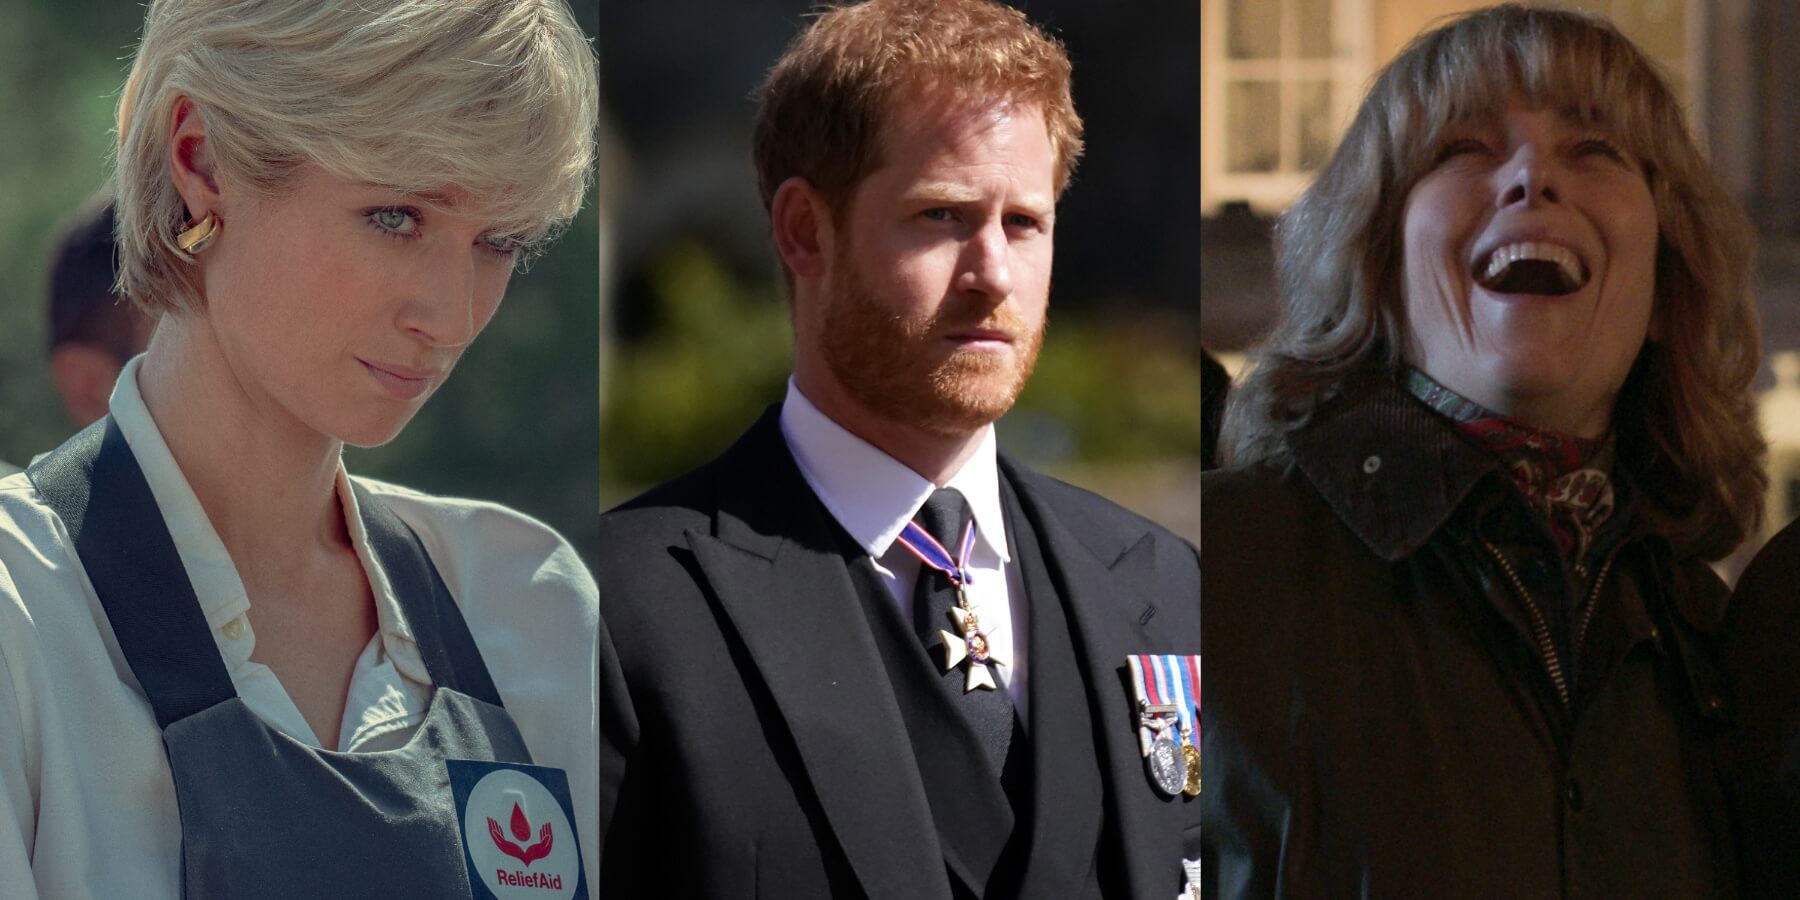 Elizabeth Debicki, Prince Harry and Olivia Williams pose in side-by-side photographs.